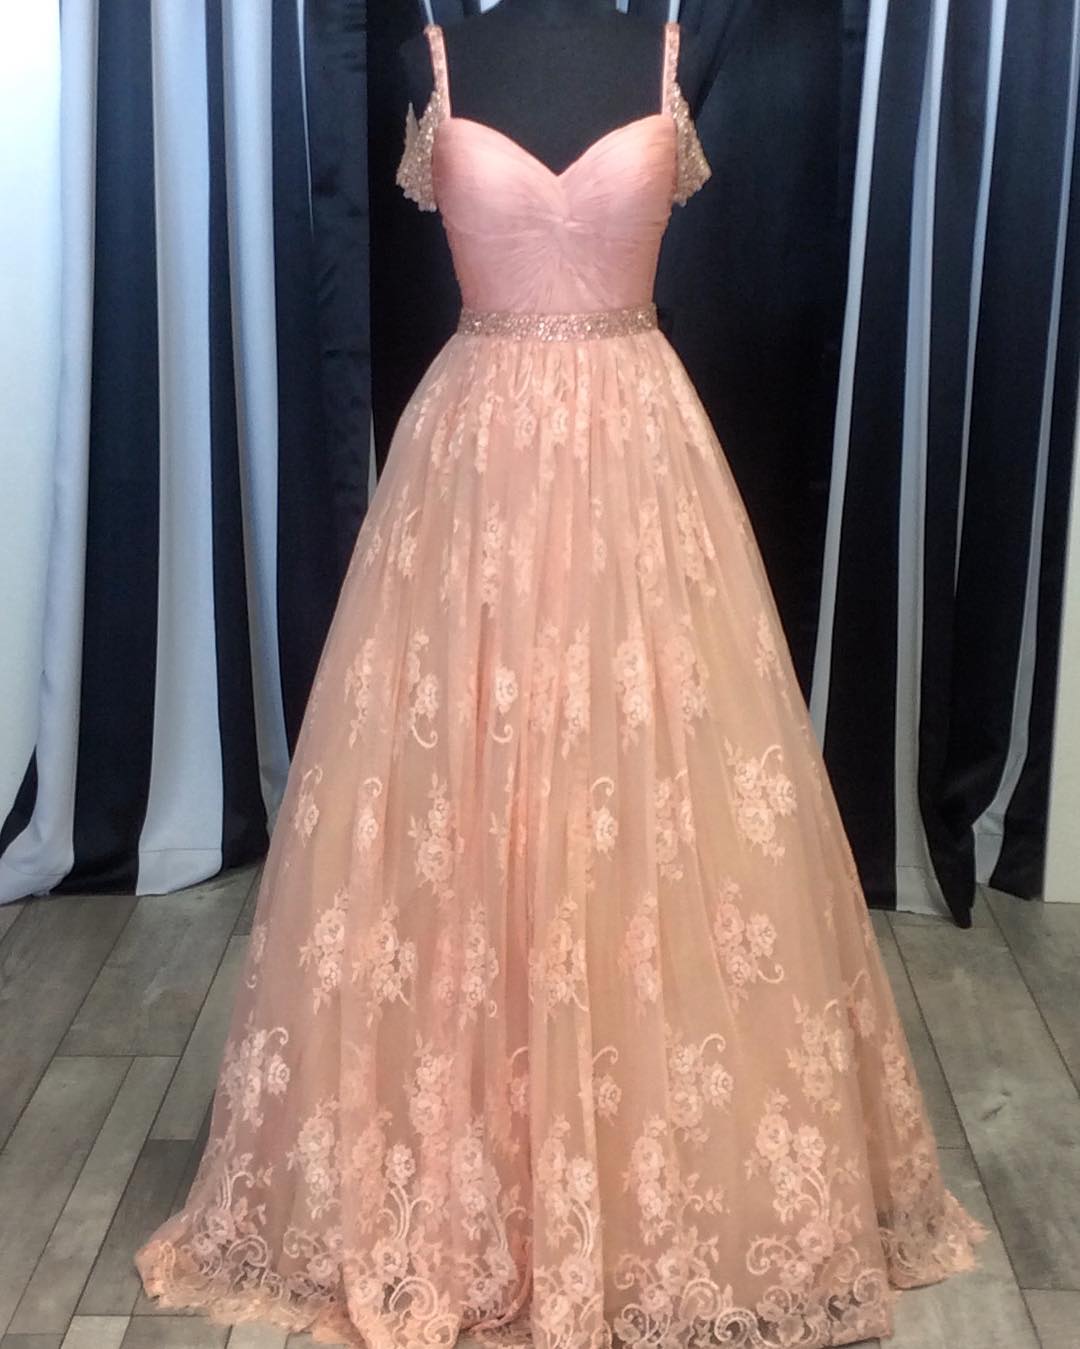 Blush Pink Lace Ball Gowns Prom Dress 2017 Women's Sweetheart Formal Dress With Beaded Straps